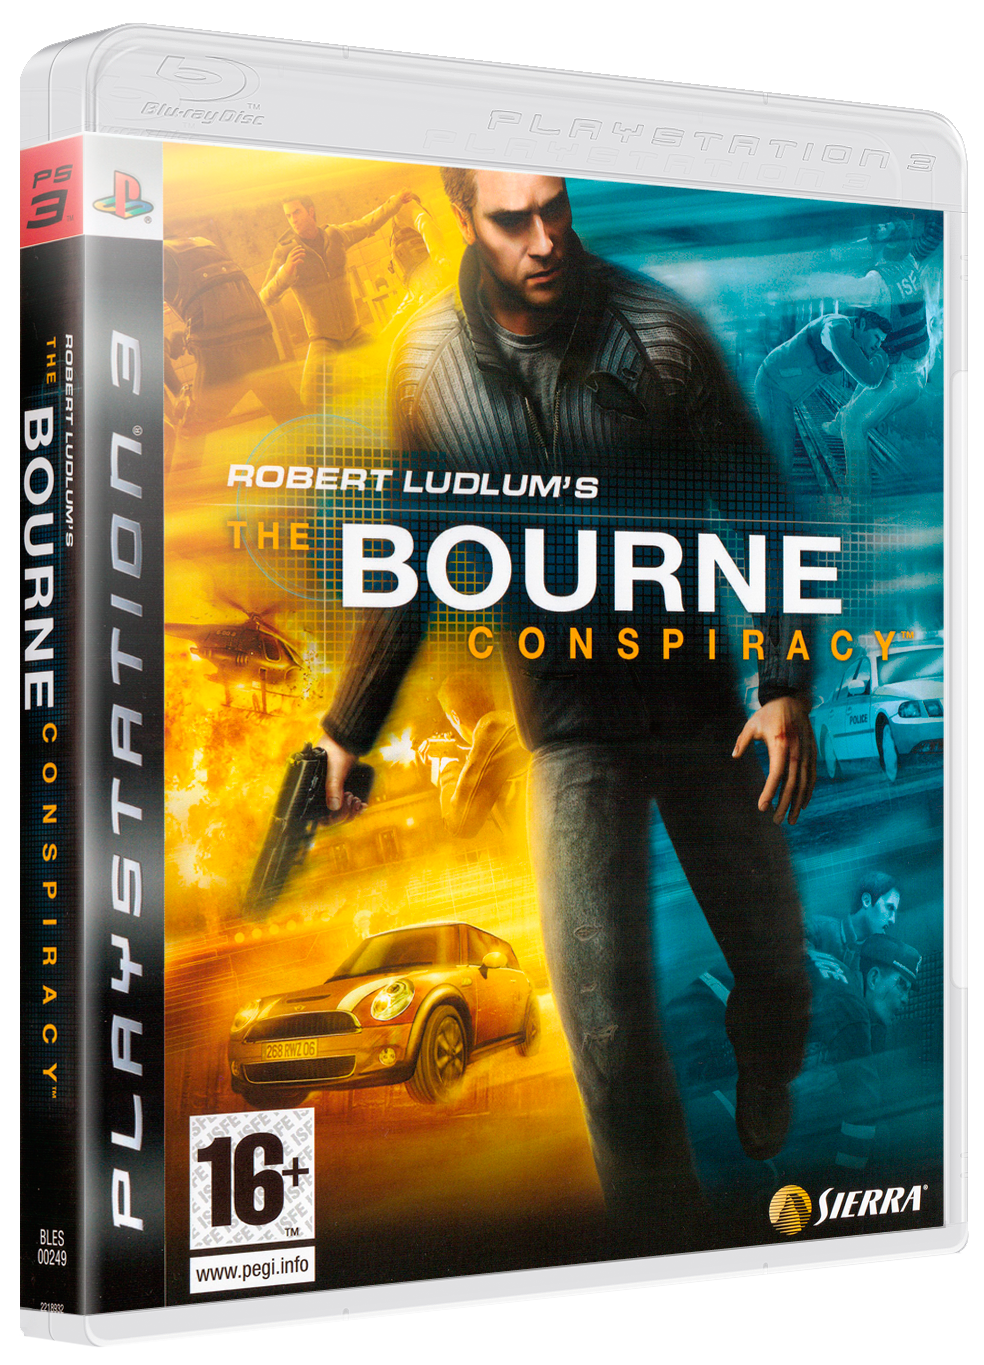 Bourne Conspiracy PS3 Box Turn.png